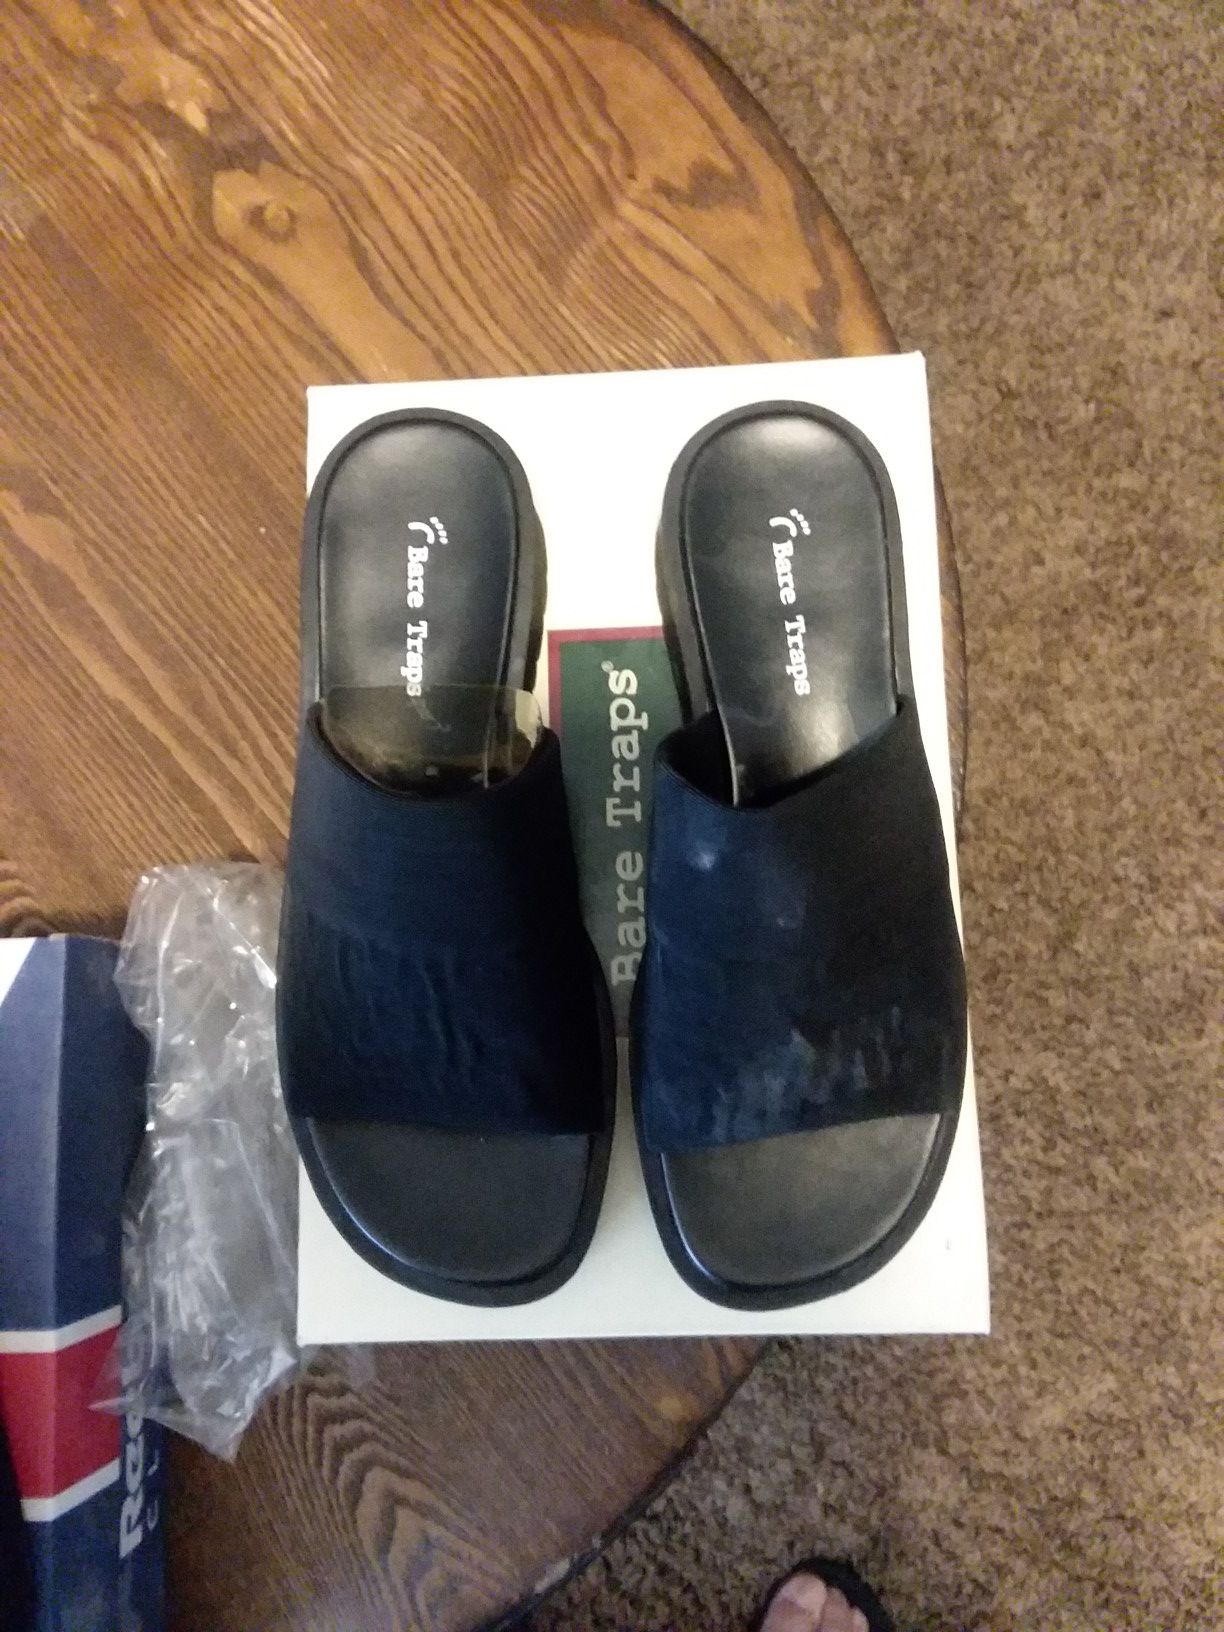 Bare trap shoes slip ons